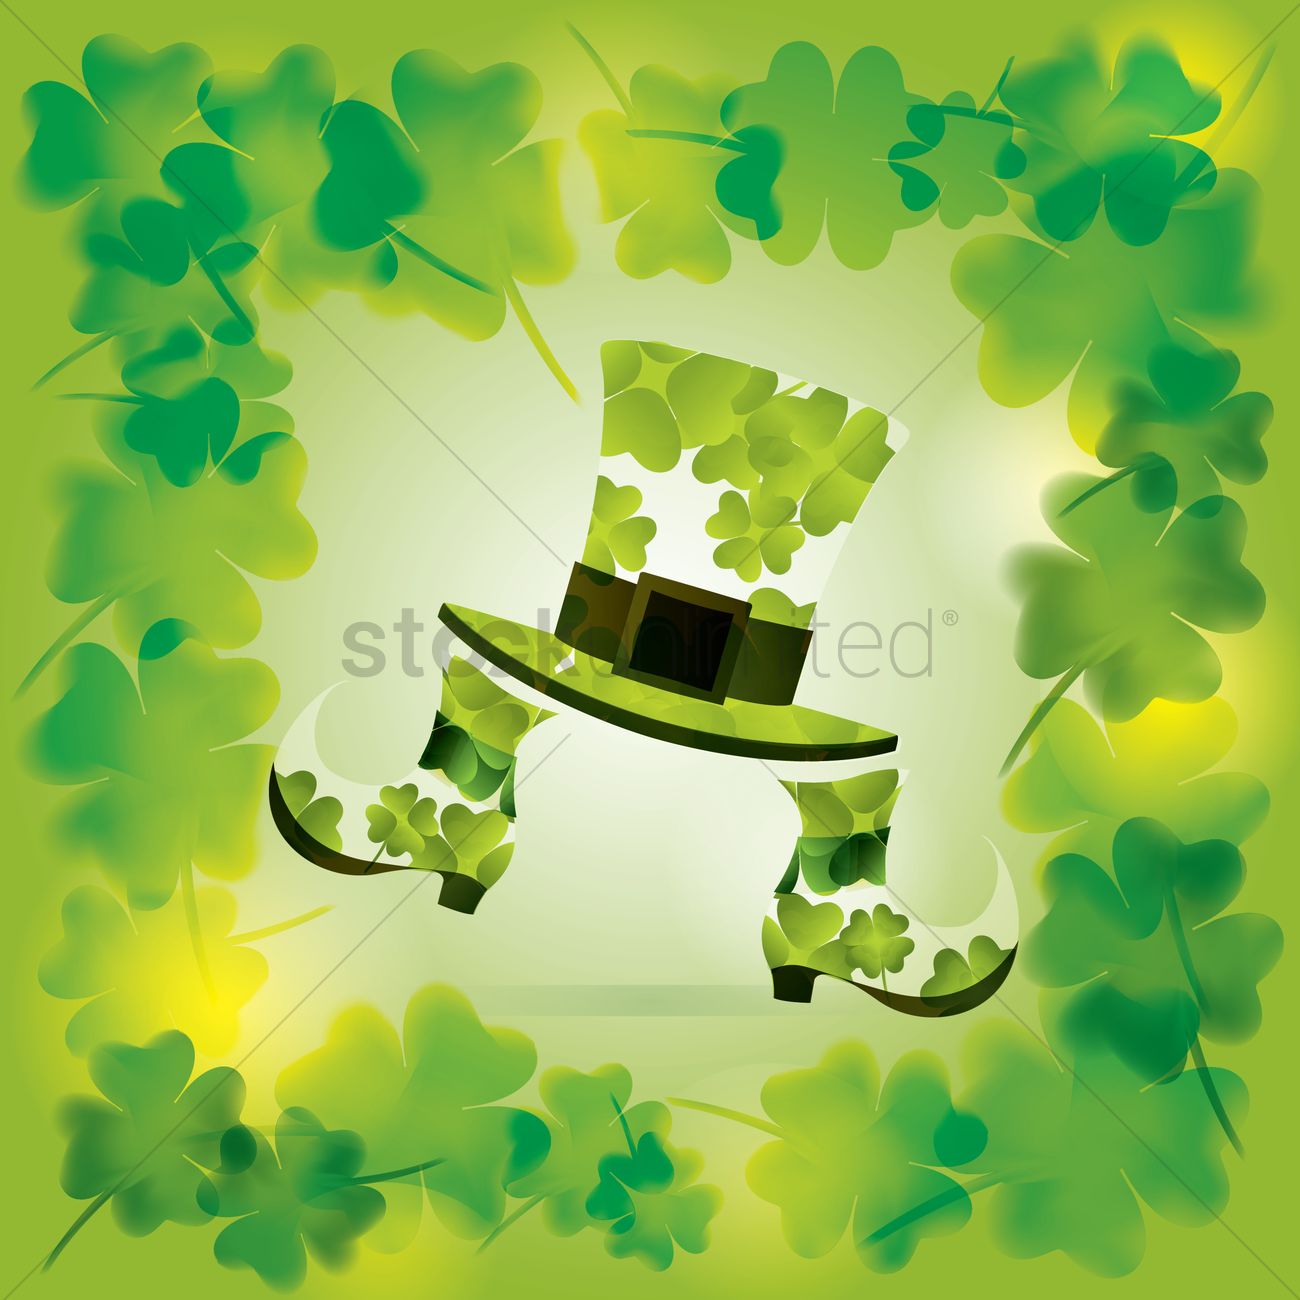 St Patrick S Day Wallpaper Vector Image Stockunlimited